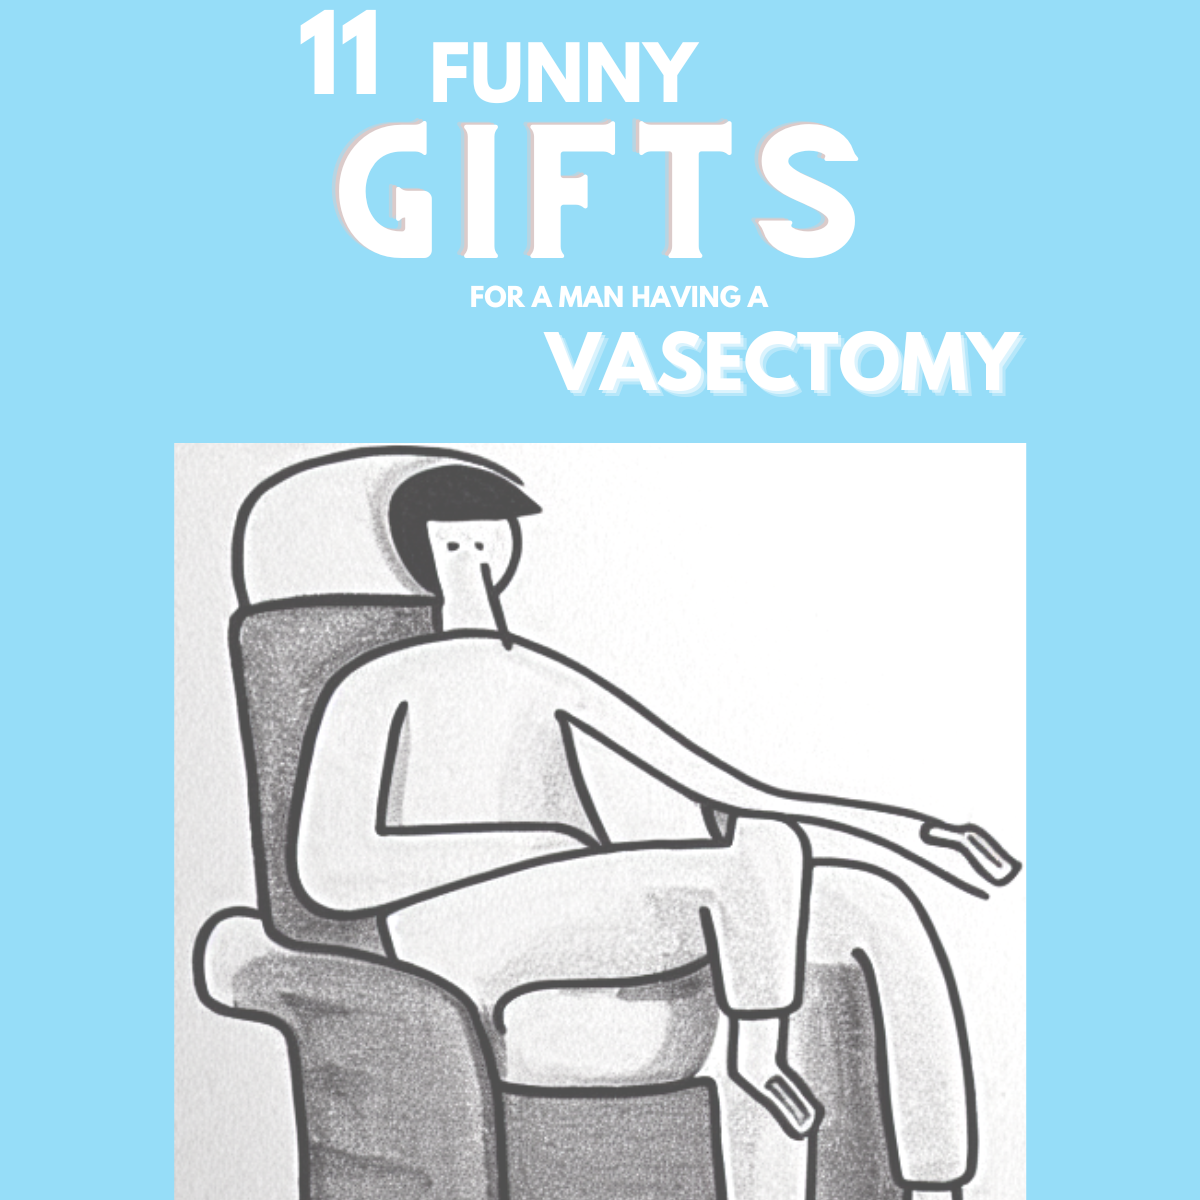 Vasectomy Gifts For Your Soon To Be Snipped Partner  MiLOWE